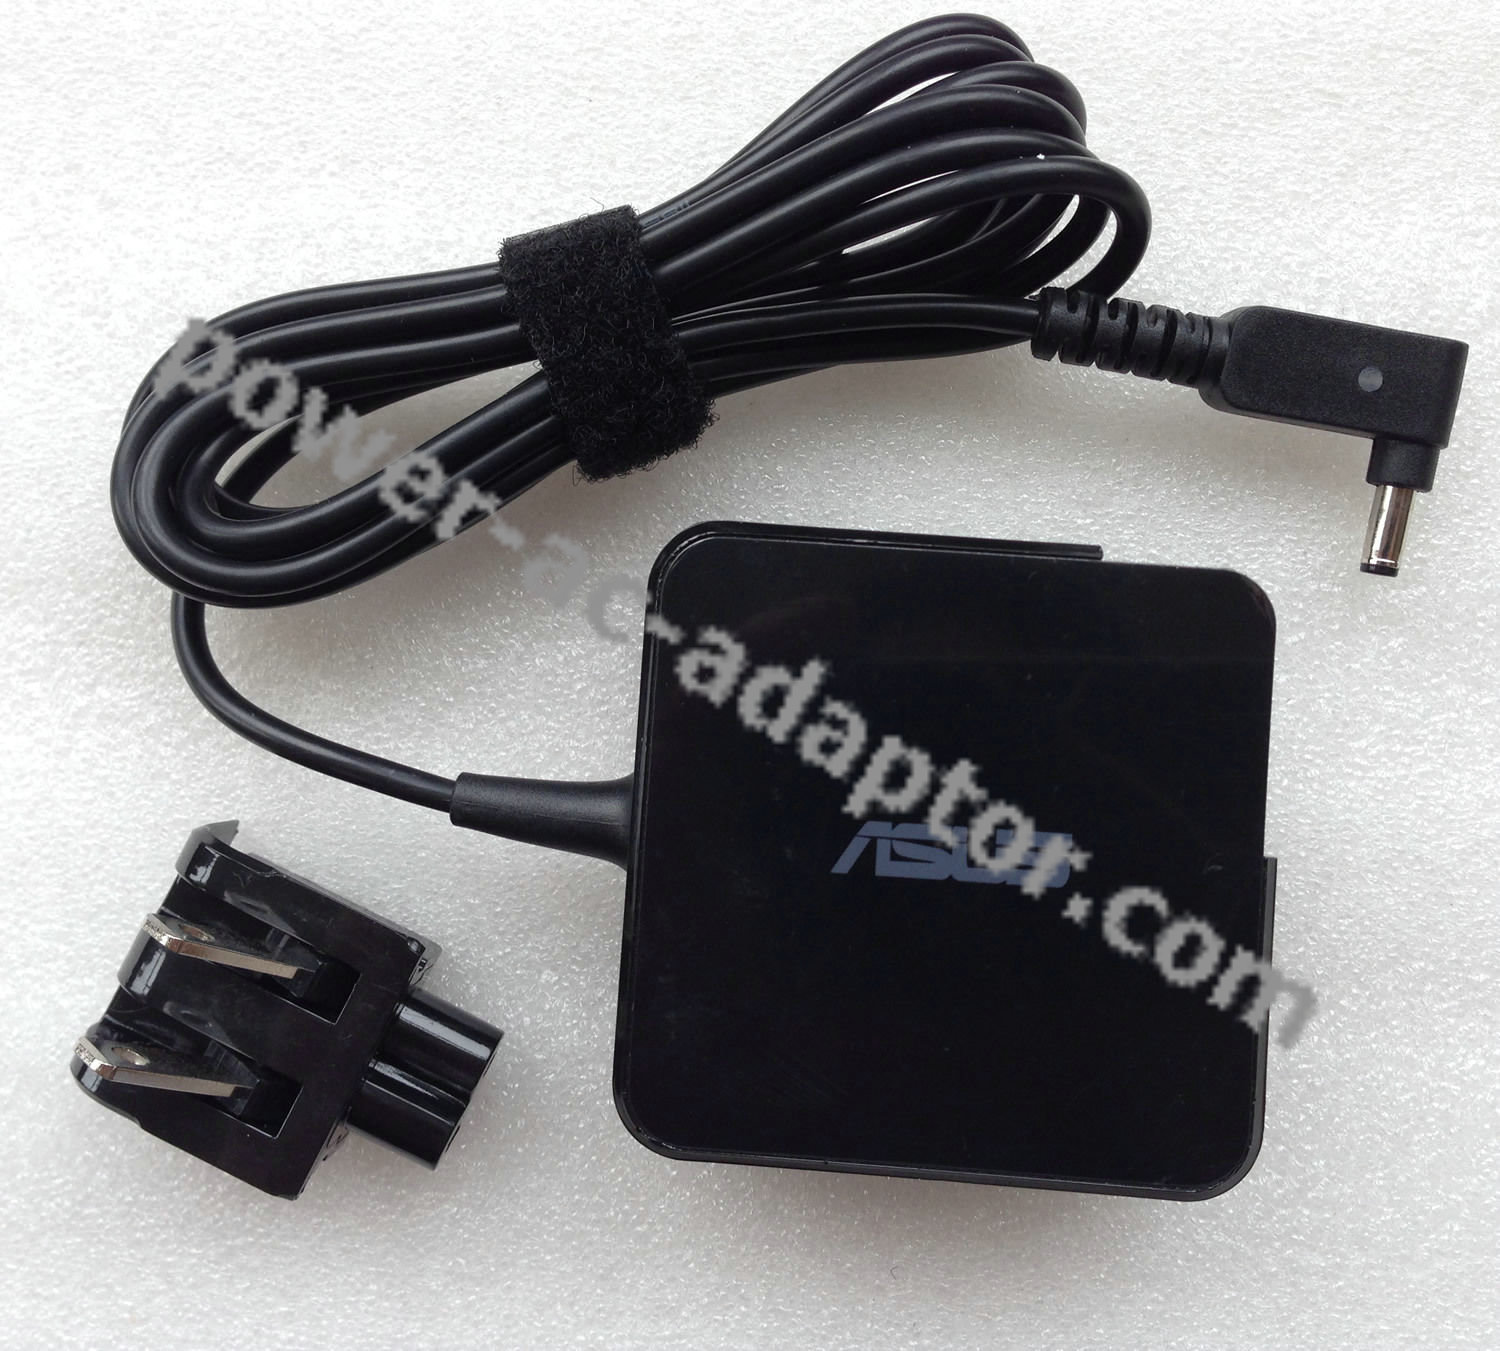 OEM ASUS 33W AC Power Adapter for ASUS X200CA-HCL1205O Notebook